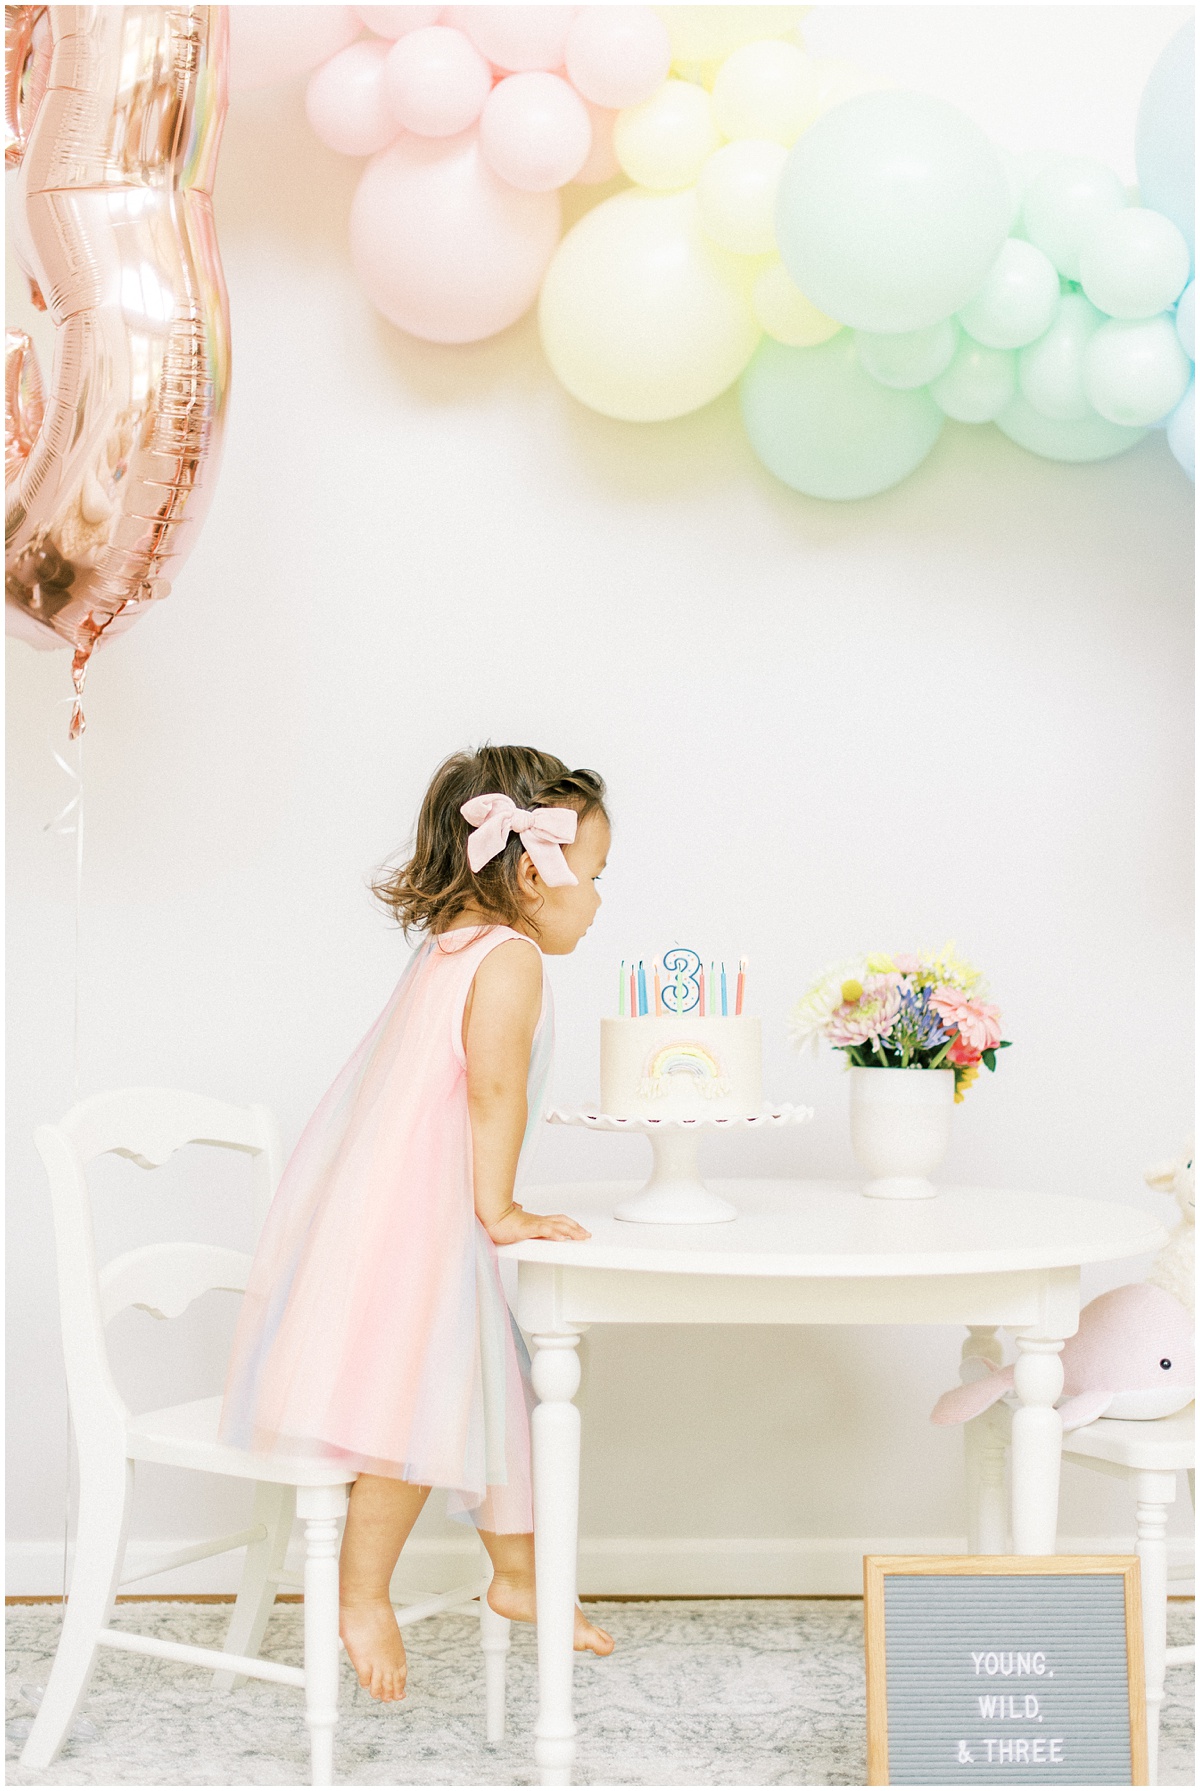 Pastel colored birthday party for 3 year old girl